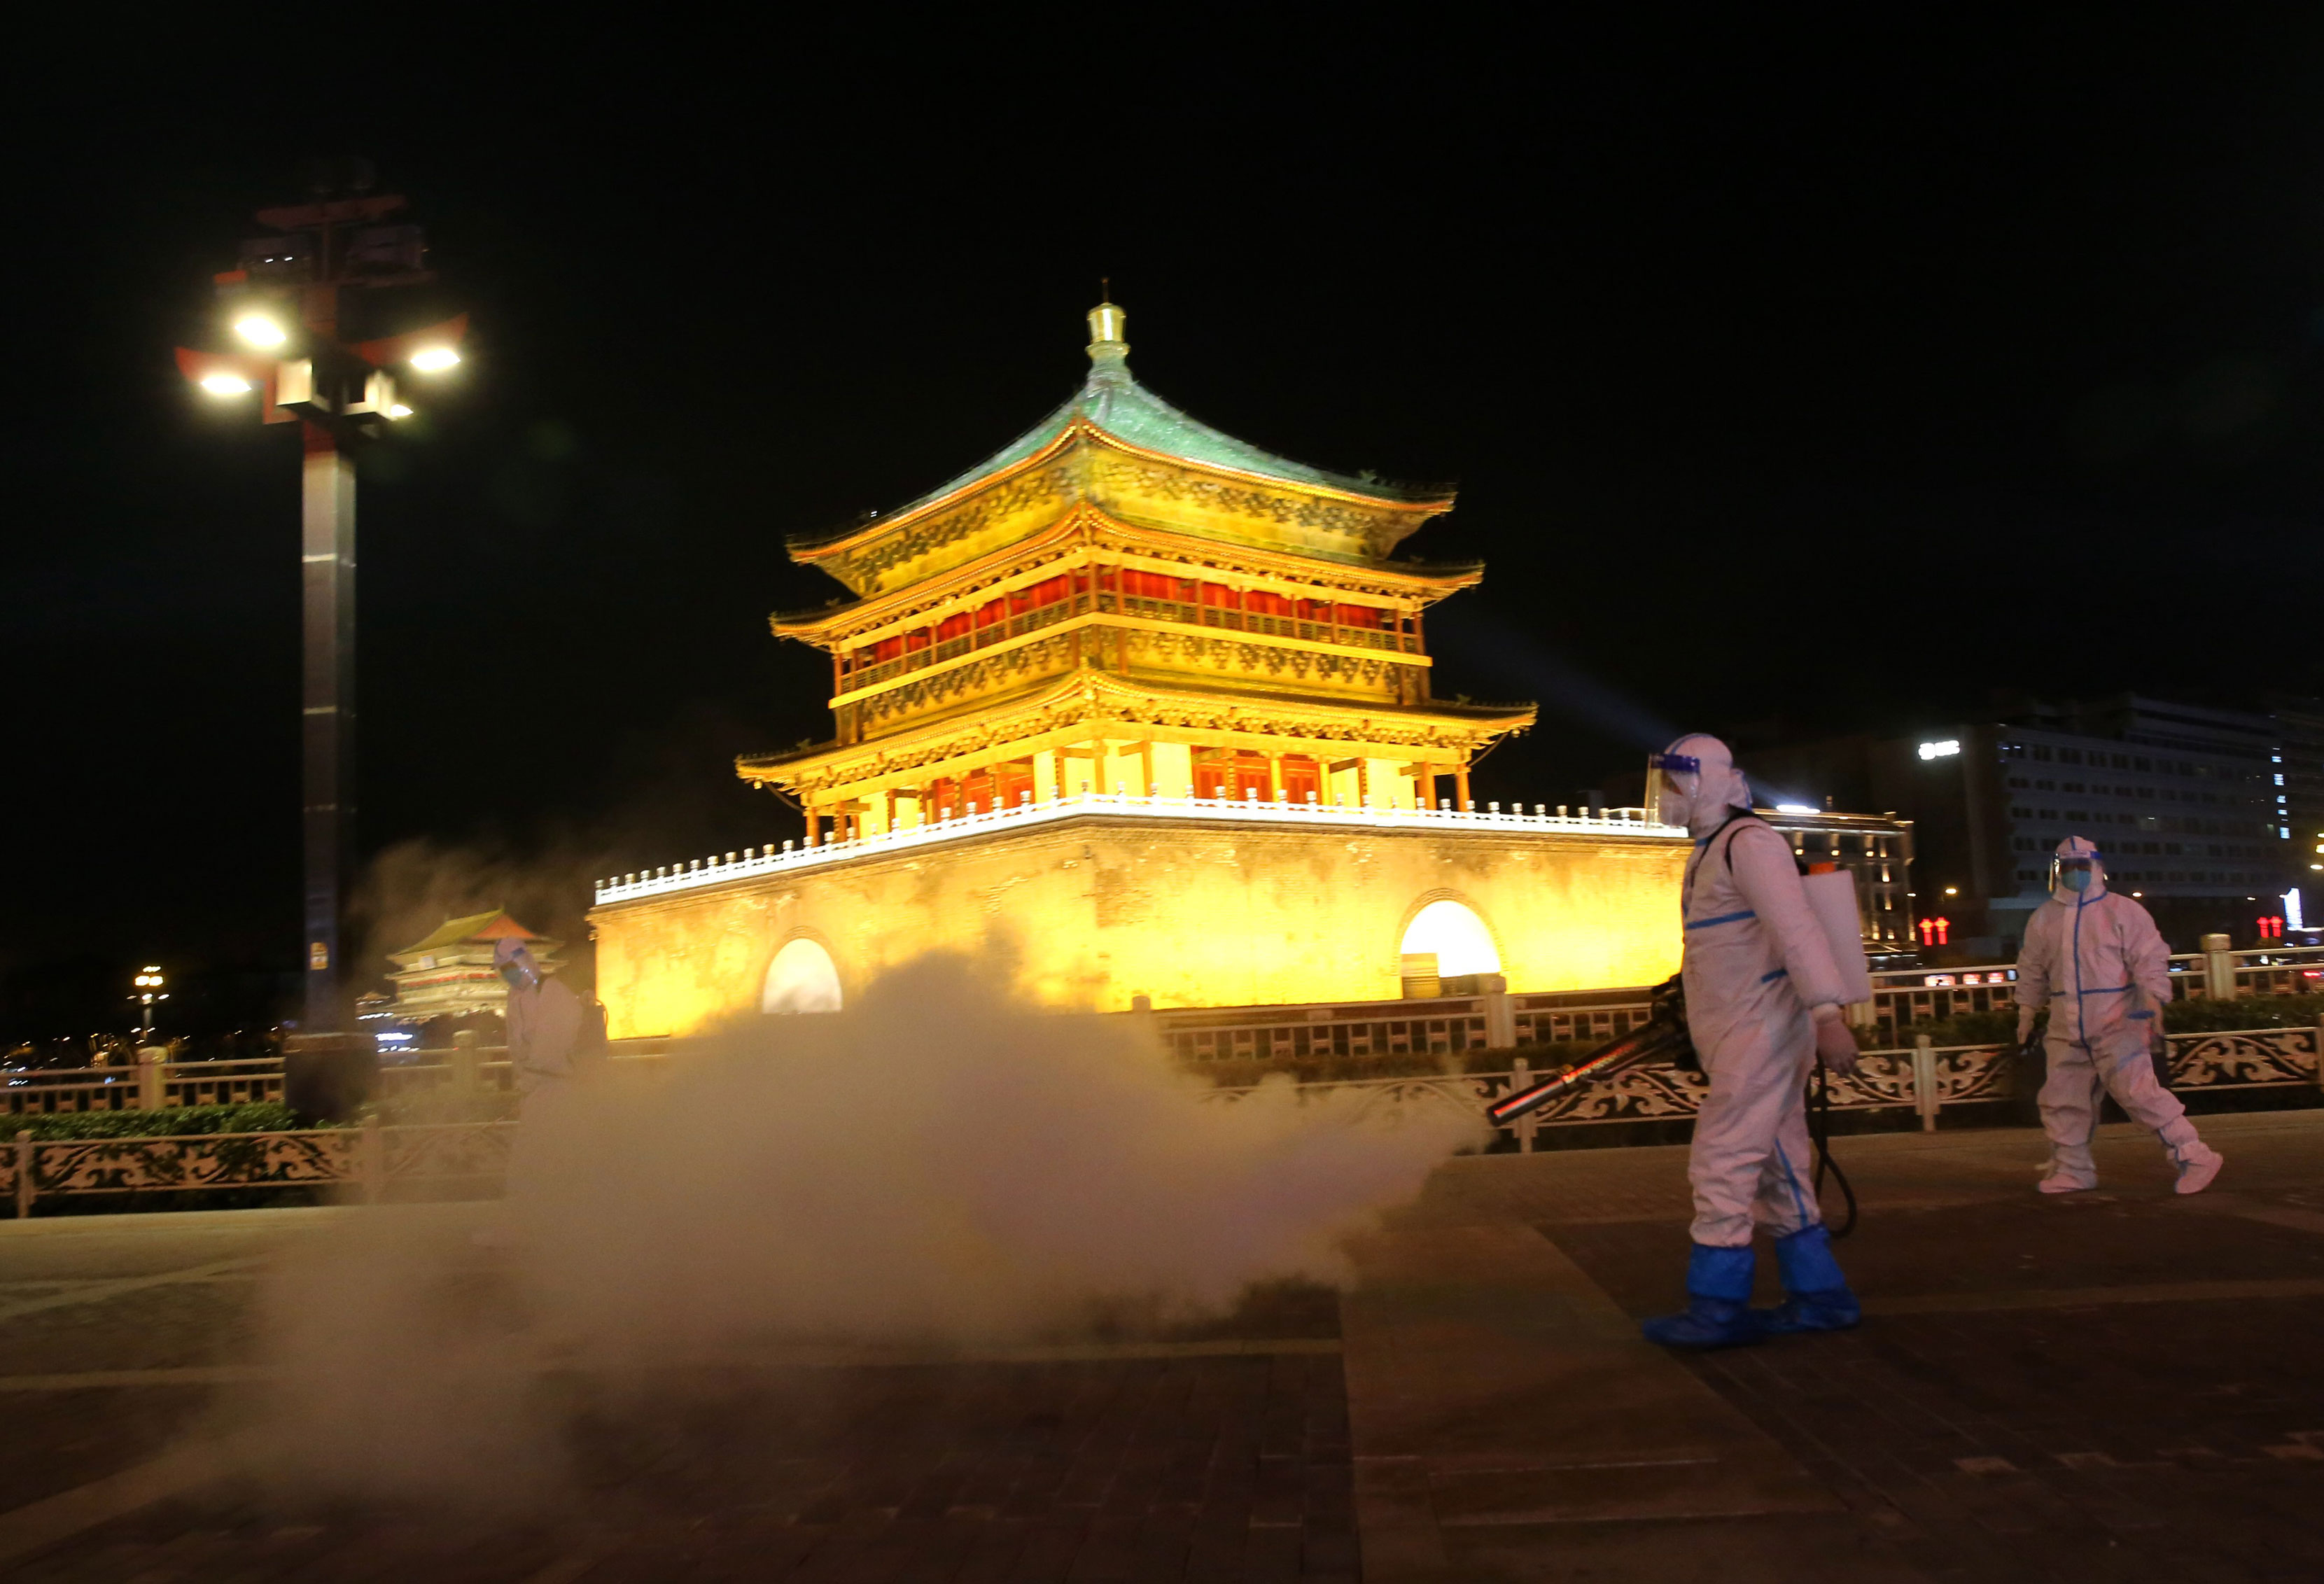 Staff members in protective suits disinfect around Xi'an Bell Tower on December 26, 2021 in Xi'an, Shaanxi Province, China.